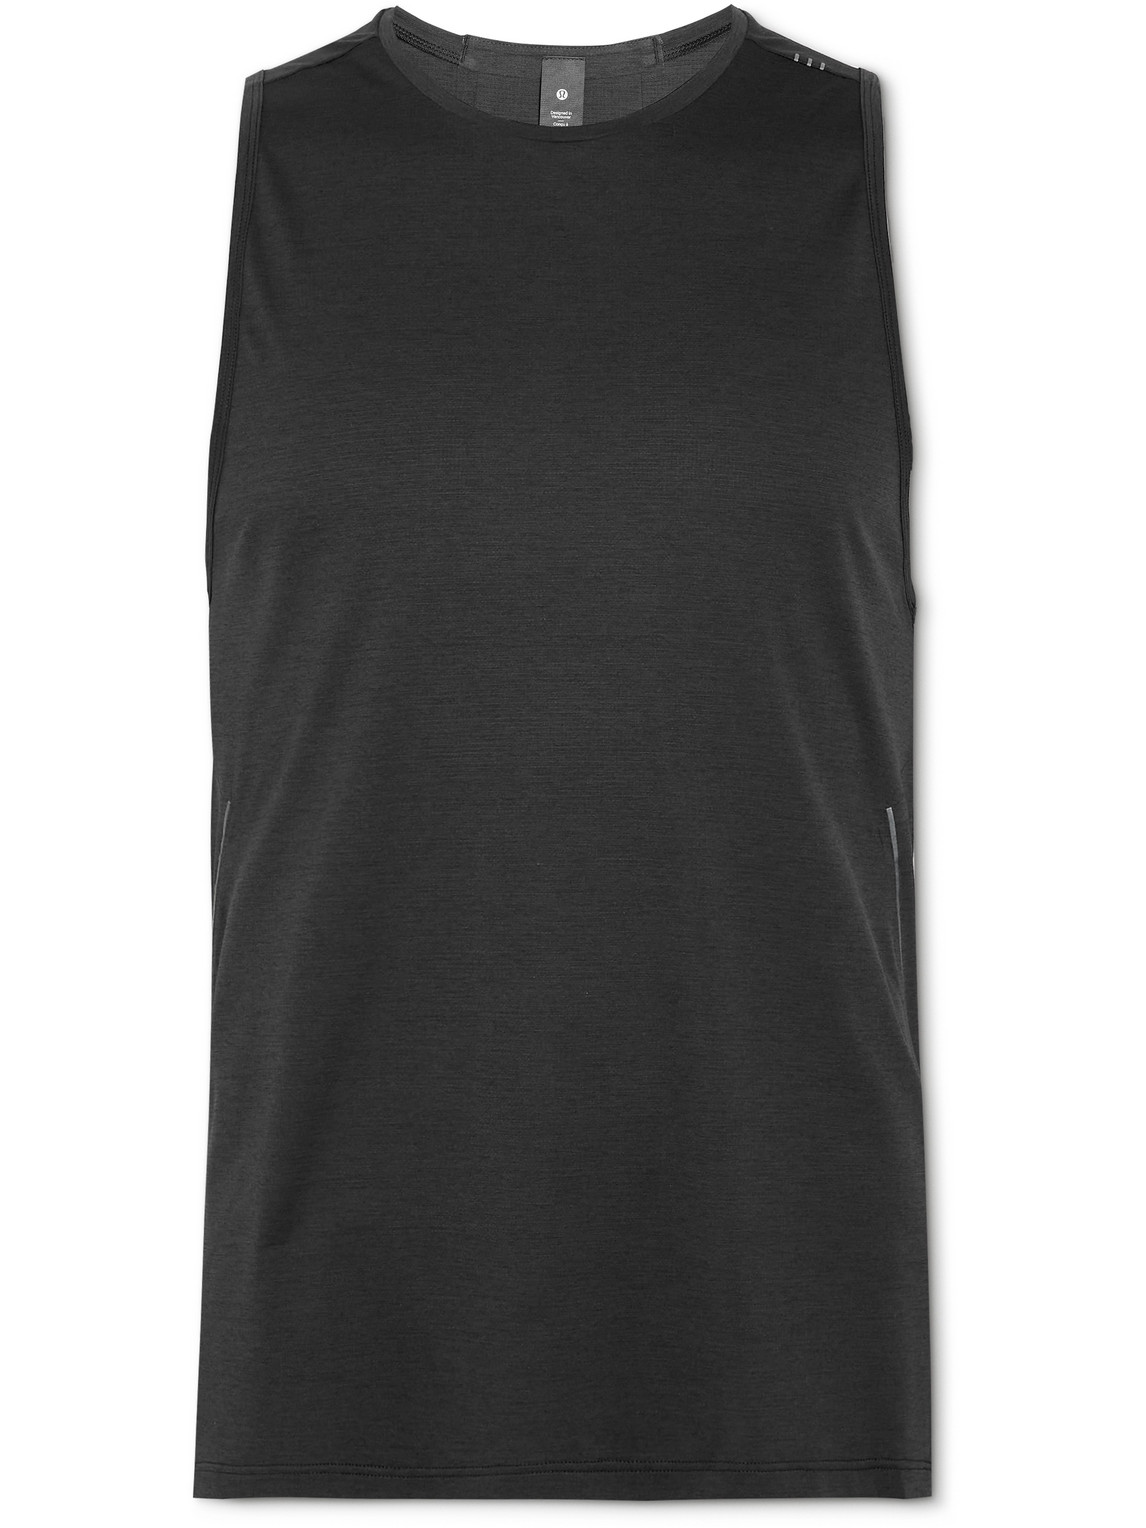 Lululemon Fast And Free Recycled Breathe Light Mesh Tank Top In Black